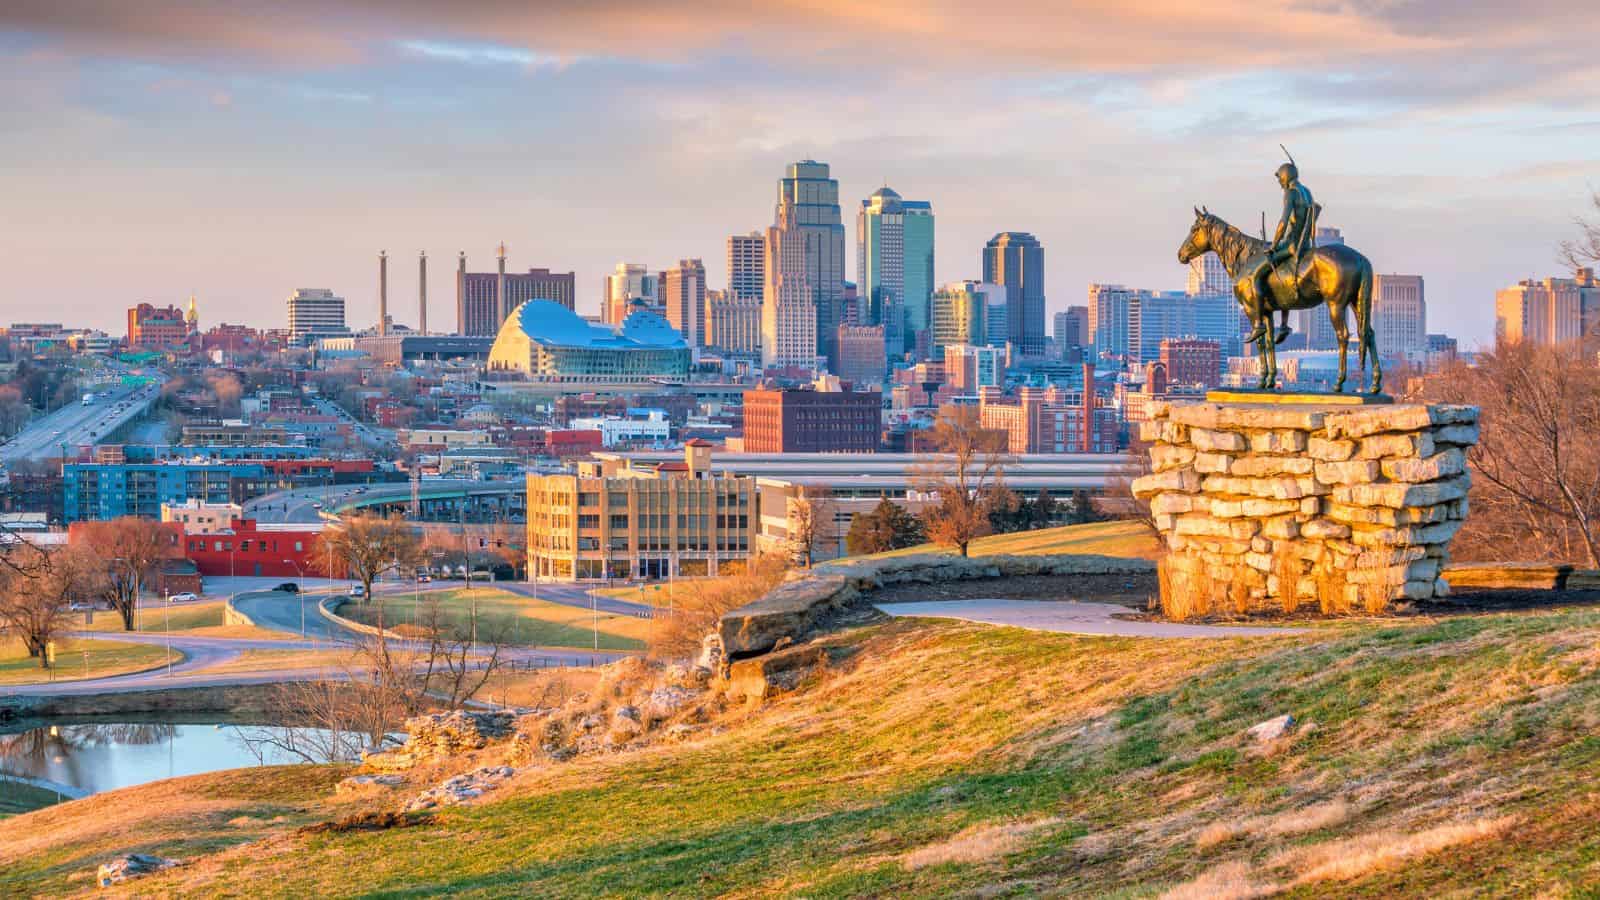 <p>Kansas City has seen a high number of crimes in recent years, although it’s important to note that crime rates are gradually starting to drop. Many of its crimes are centered around homicide; however, with police reforms and community initiatives, the city is working incredibly hard to change this.</p>